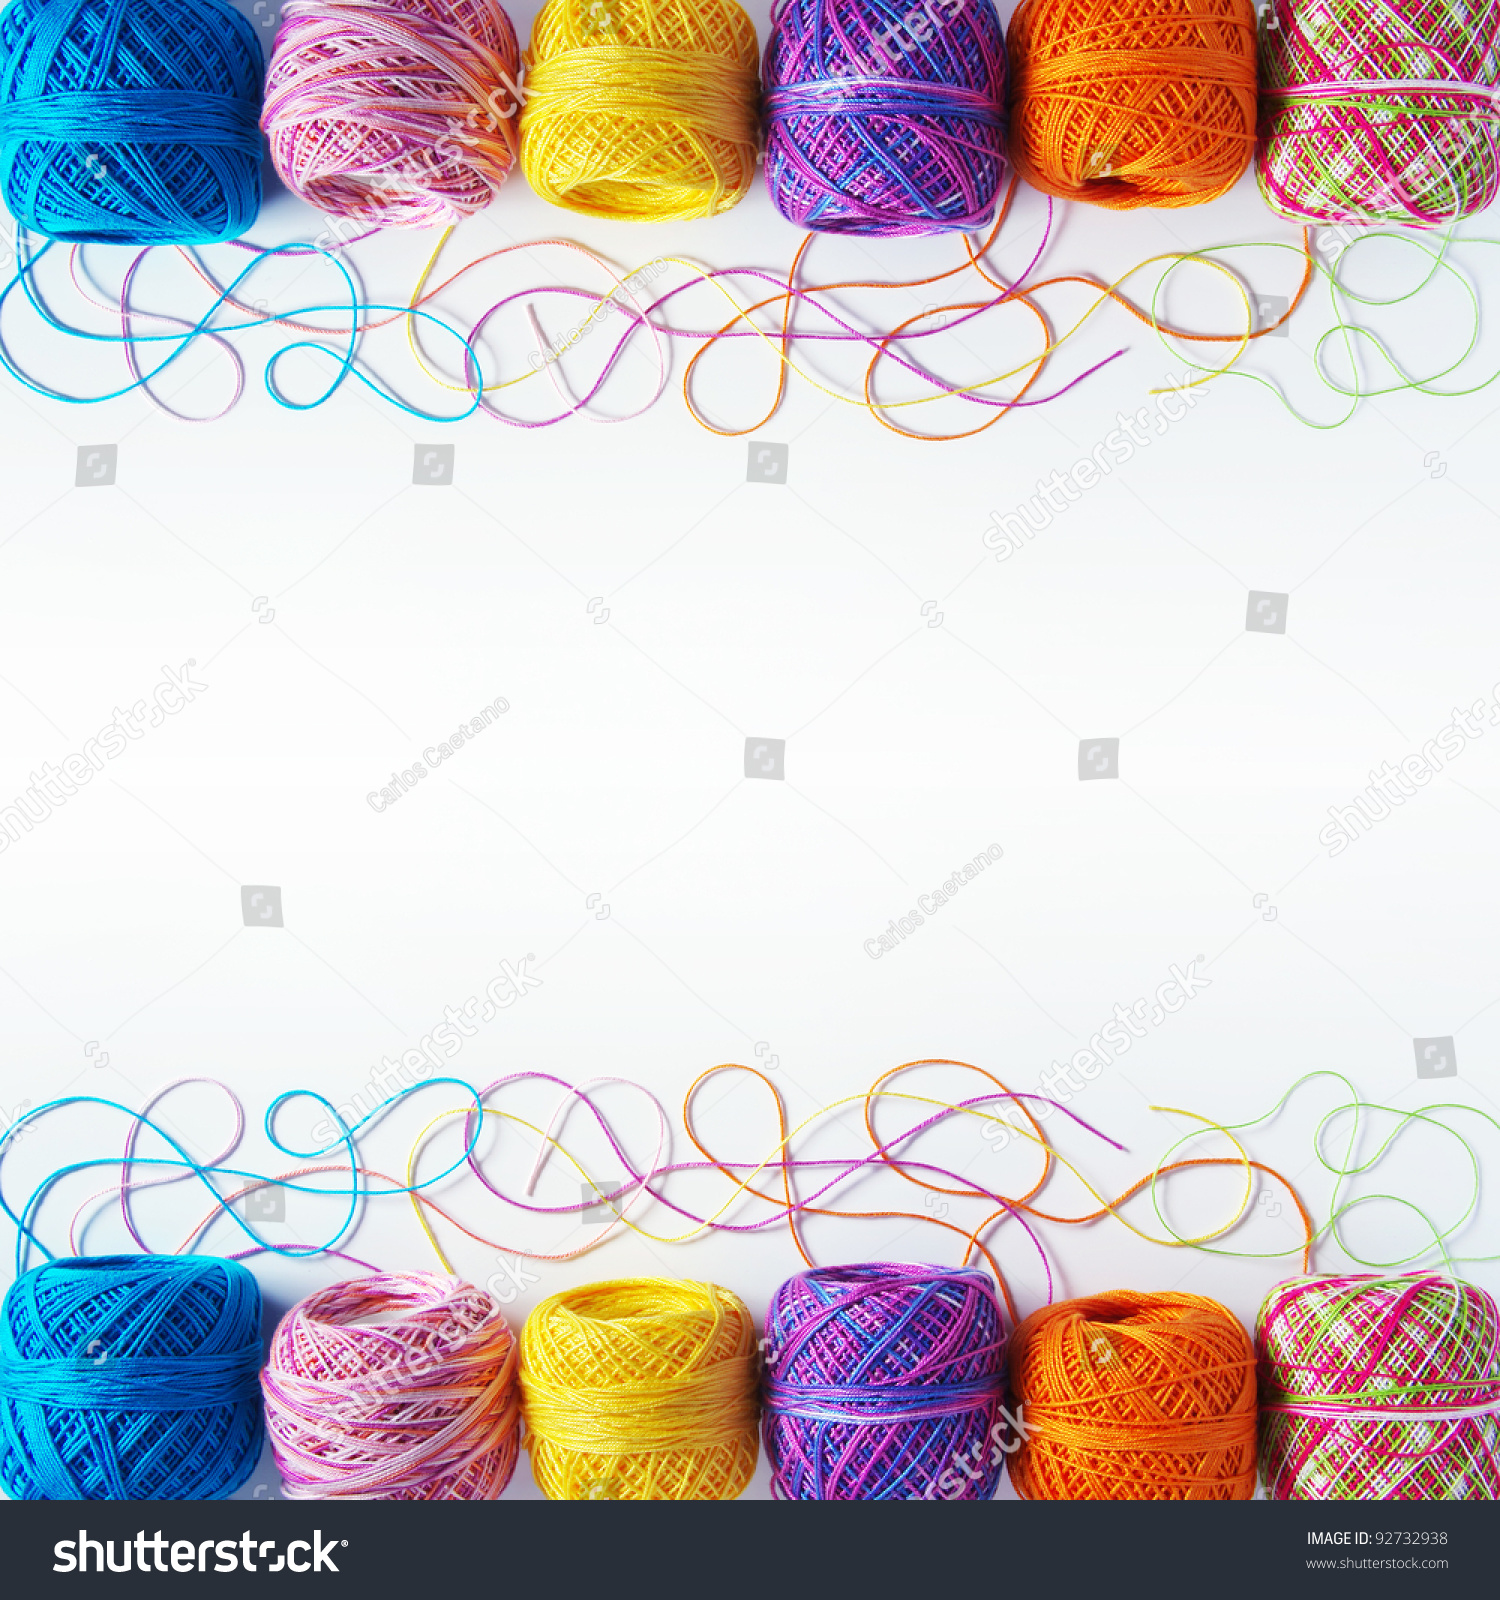 Colorful Knitting Yarn Coils Over White Background Stock